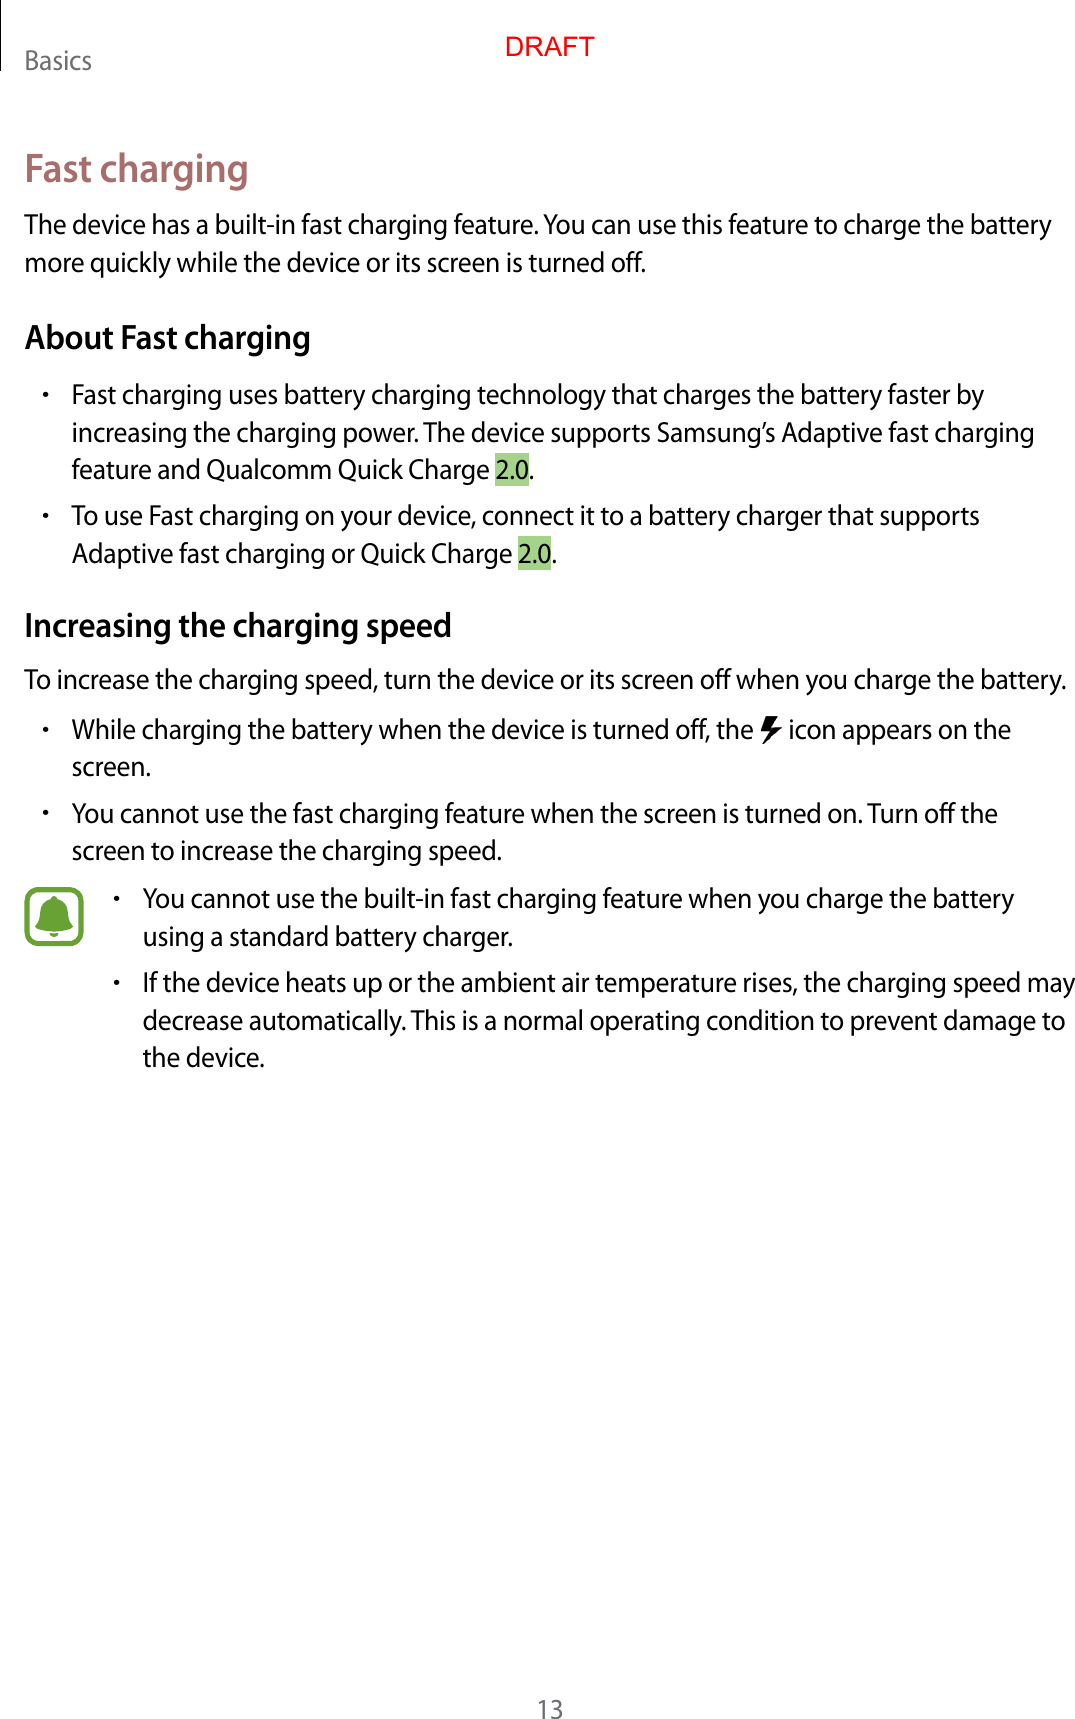 Basics13Fast chargingThe device has a built -in fast charg ing f ea tur e . You can use this featur e to char ge the batt ery more quickly while the device or its screen is turned off.About Fast charging•Fast charg ing uses batt ery charging technology that charges the ba ttery faster by increasing the char ging po w er. The device supports Samsung ’s Adaptiv e fast char ging featur e and Qualc omm Quick Charge 2.0.•To use Fast charg ing on y our device, connect it to a batt ery charger that supports Adaptiv e fast char ging or Quick Char ge 2.0.Increasing the charg ing speedTo increase the char ging speed , turn the device or its scr een off when y ou char ge the ba ttery.•While charg ing the batt ery when the device is turned off , the   icon appears on the screen.•You cannot use the fast charging featur e when the screen is turned on.  Turn off the screen to incr ease the char g ing speed .•You cannot use the built-in fast charging f eatur e when y ou char ge the batt ery using a standard batt ery charger.•If the device heats up or the ambient air tempera tur e rises, the char g ing speed ma y decrease automa tically. T his is a normal operating c ondition to pr ev en t damage to the device .DRAFT